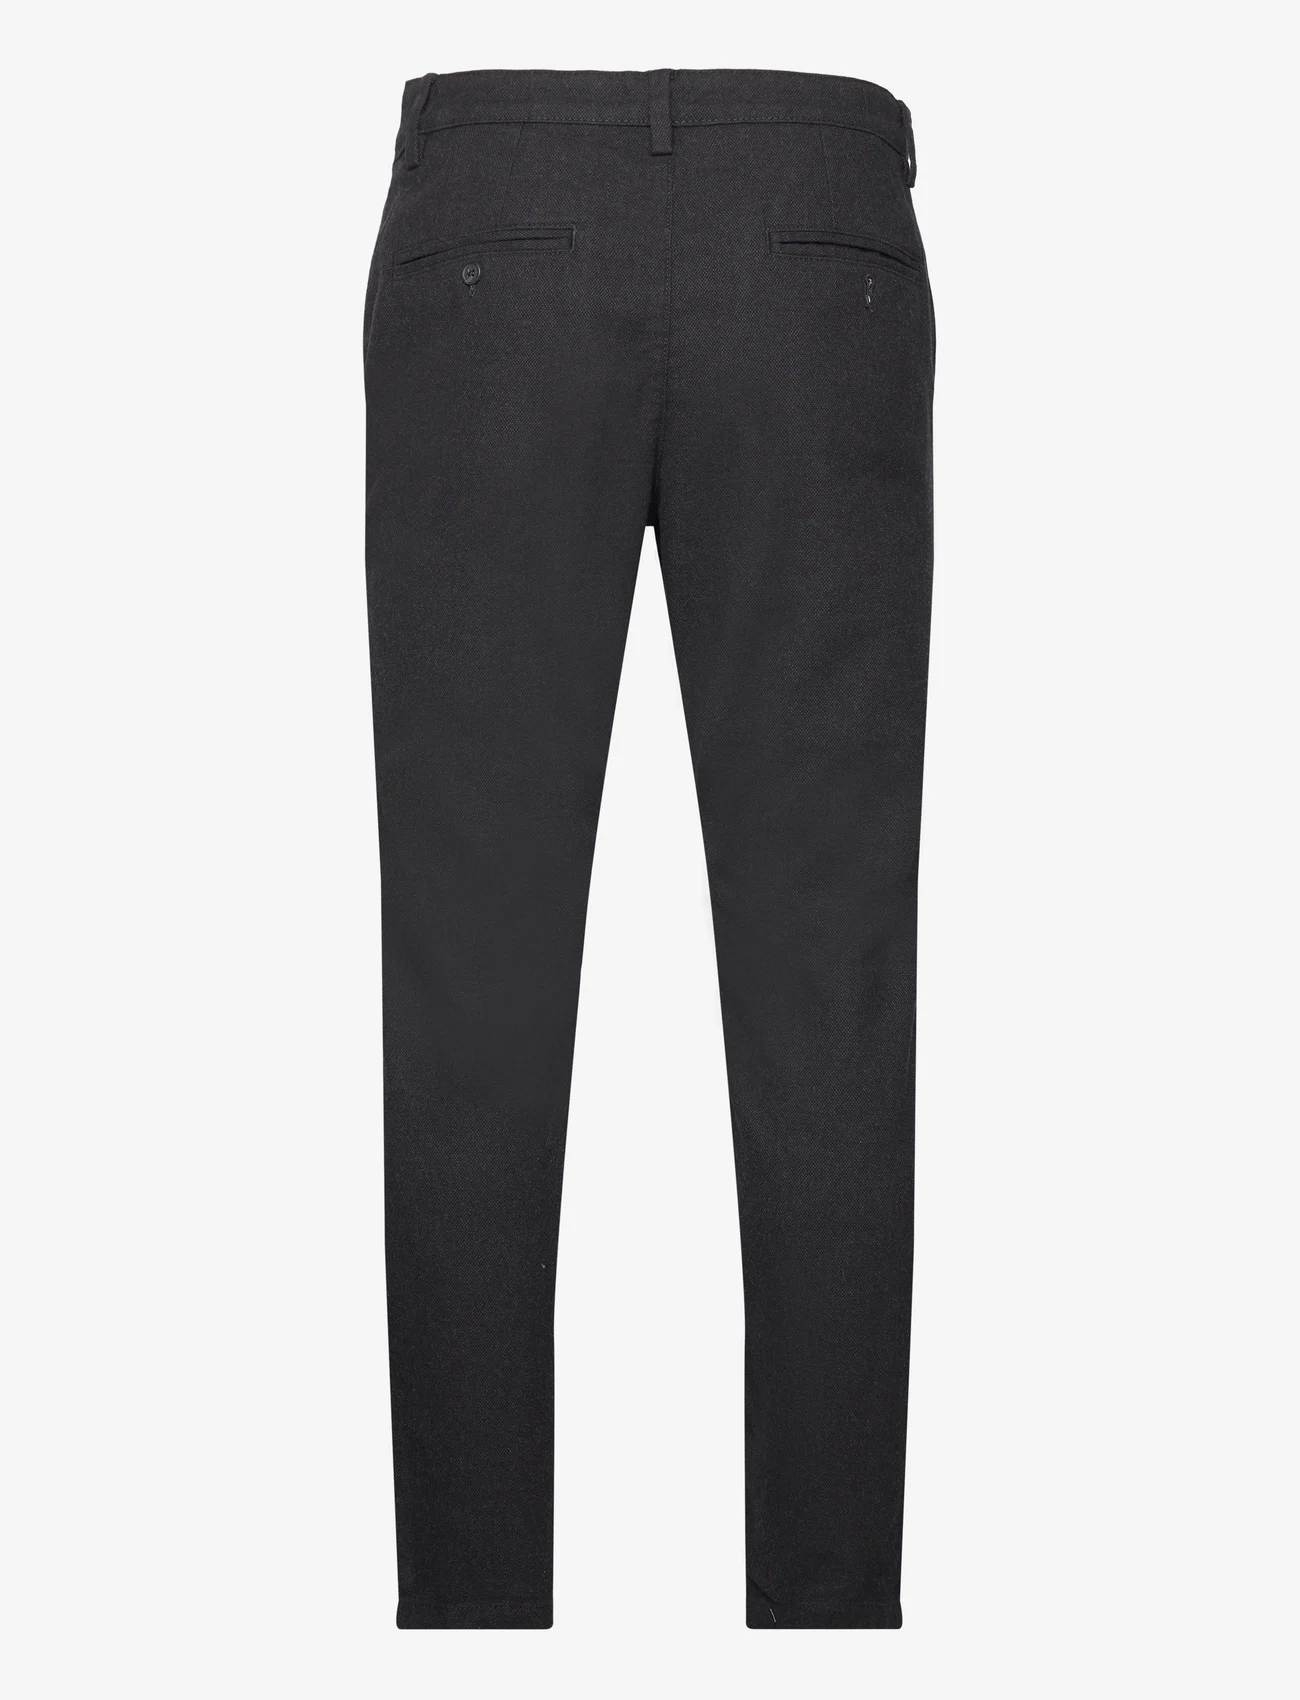 Selected Homme - SLHSLIM-MILES 175 BRUSHED PANTS W NOOS - kostymbyxor - black - 1